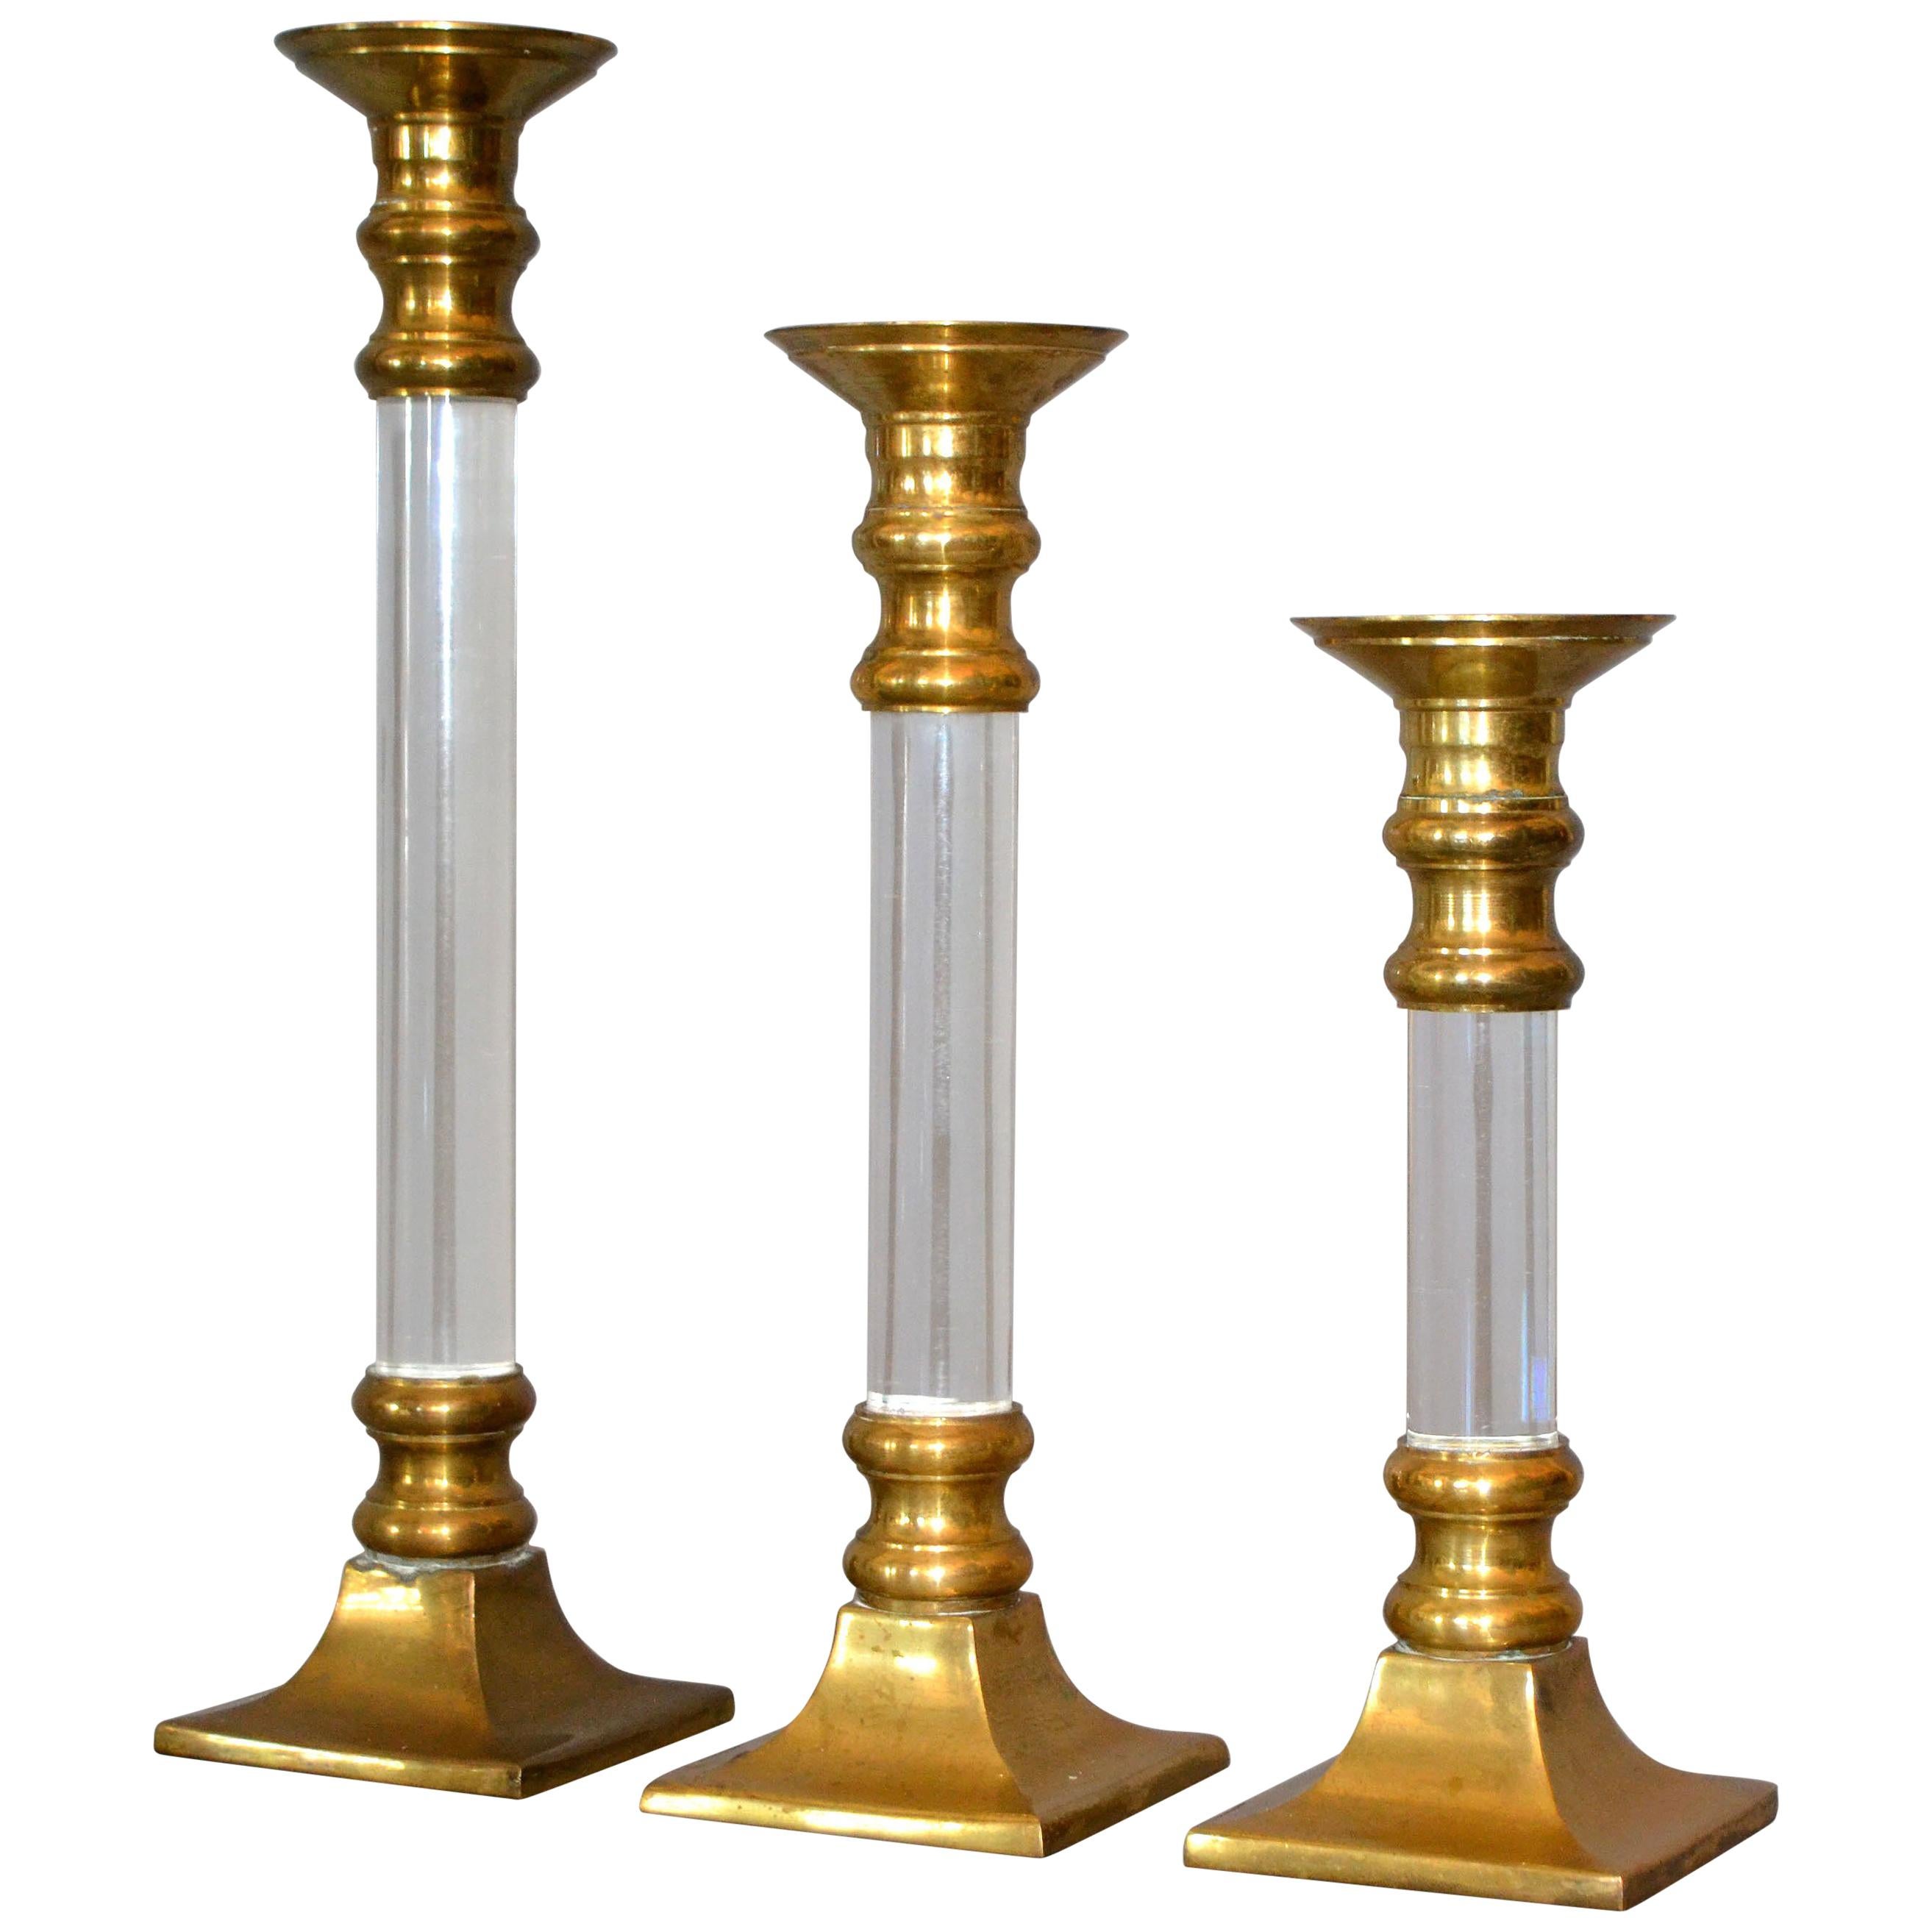 Mid-Century Modern Lucite and Brass Candle Holders or Candlesticks, Set of 3 